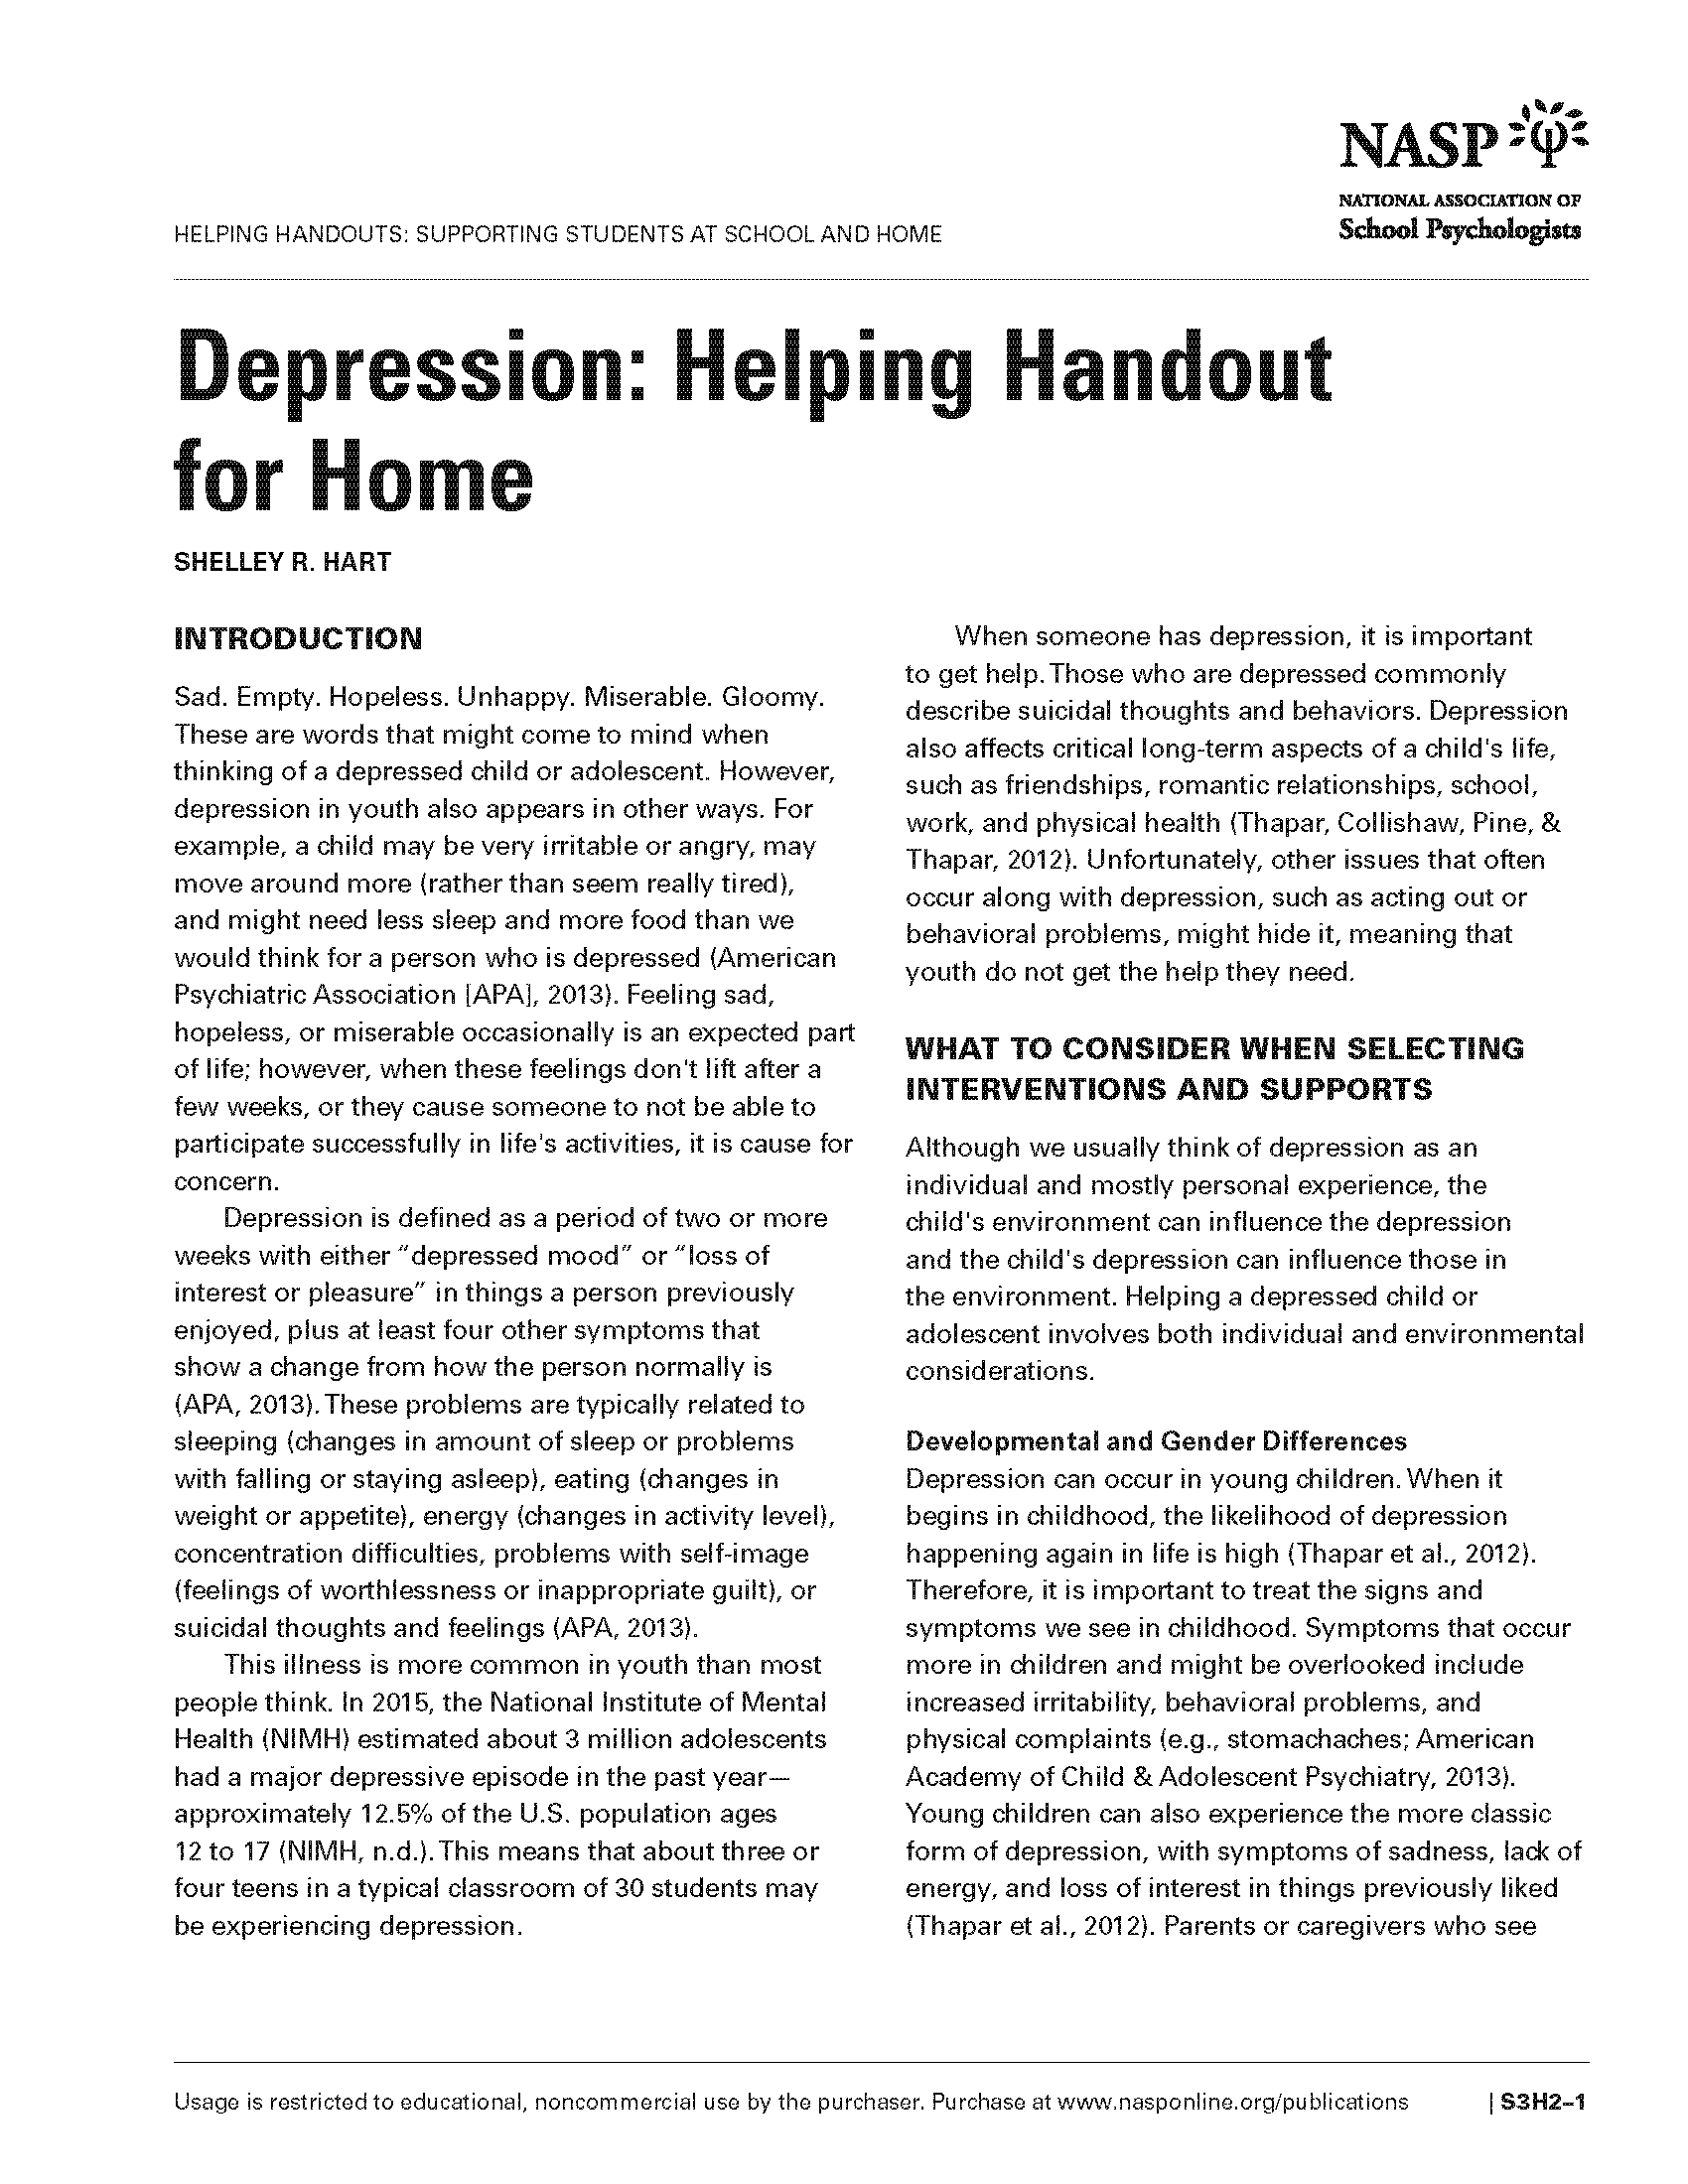 Depression: Helping Handout for Home